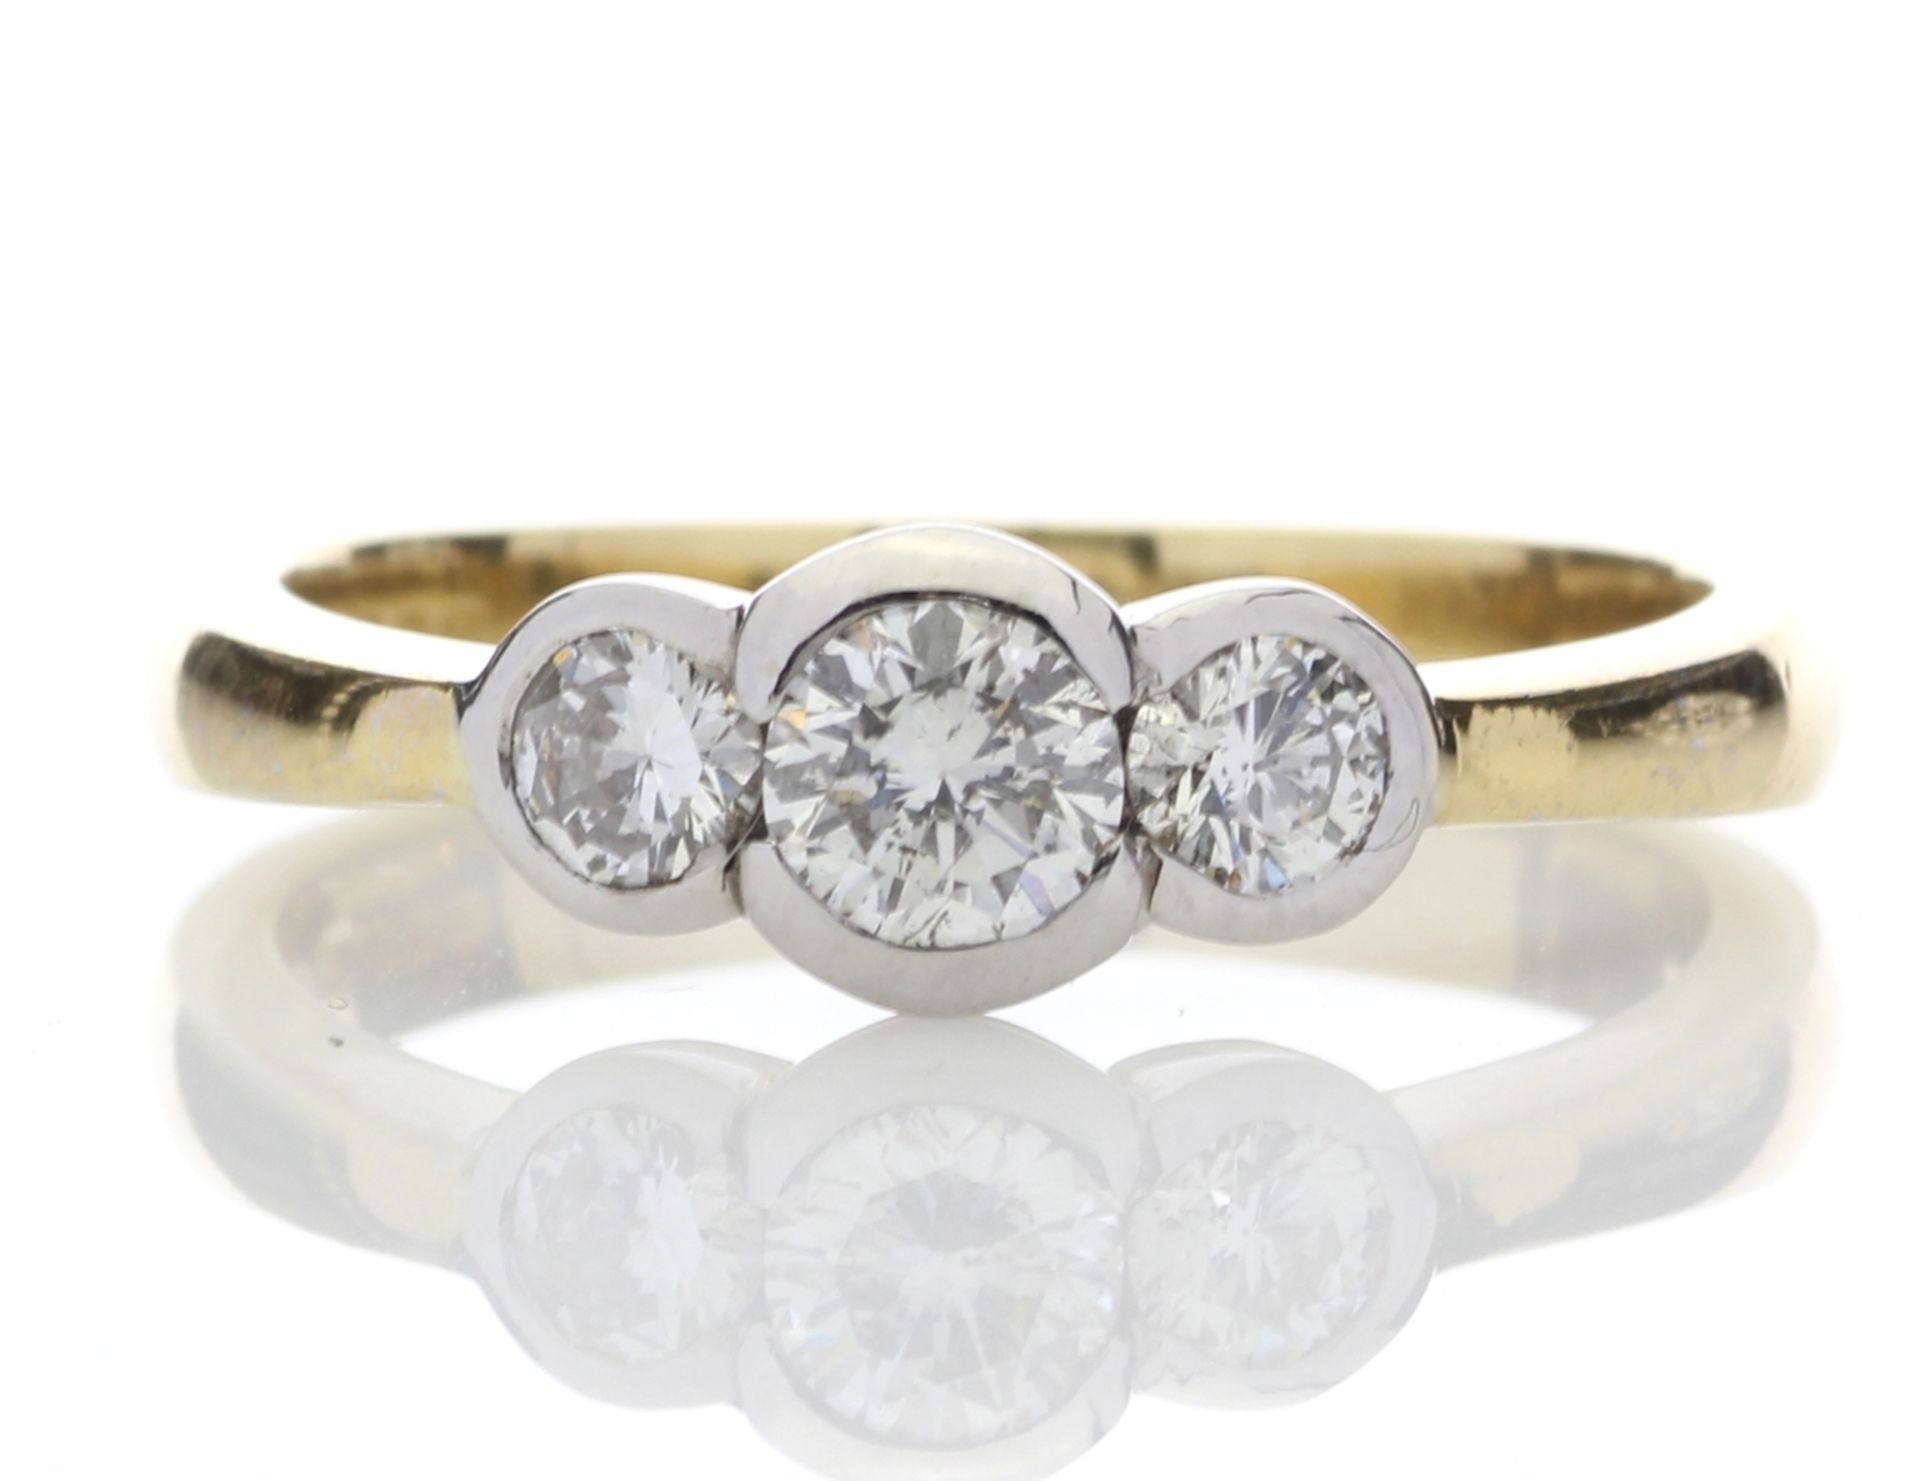 18ct Three Stone Rub Over Set Diamond Ring 0.65 Carats - Valued by GIE £11,495.00 - Three natural